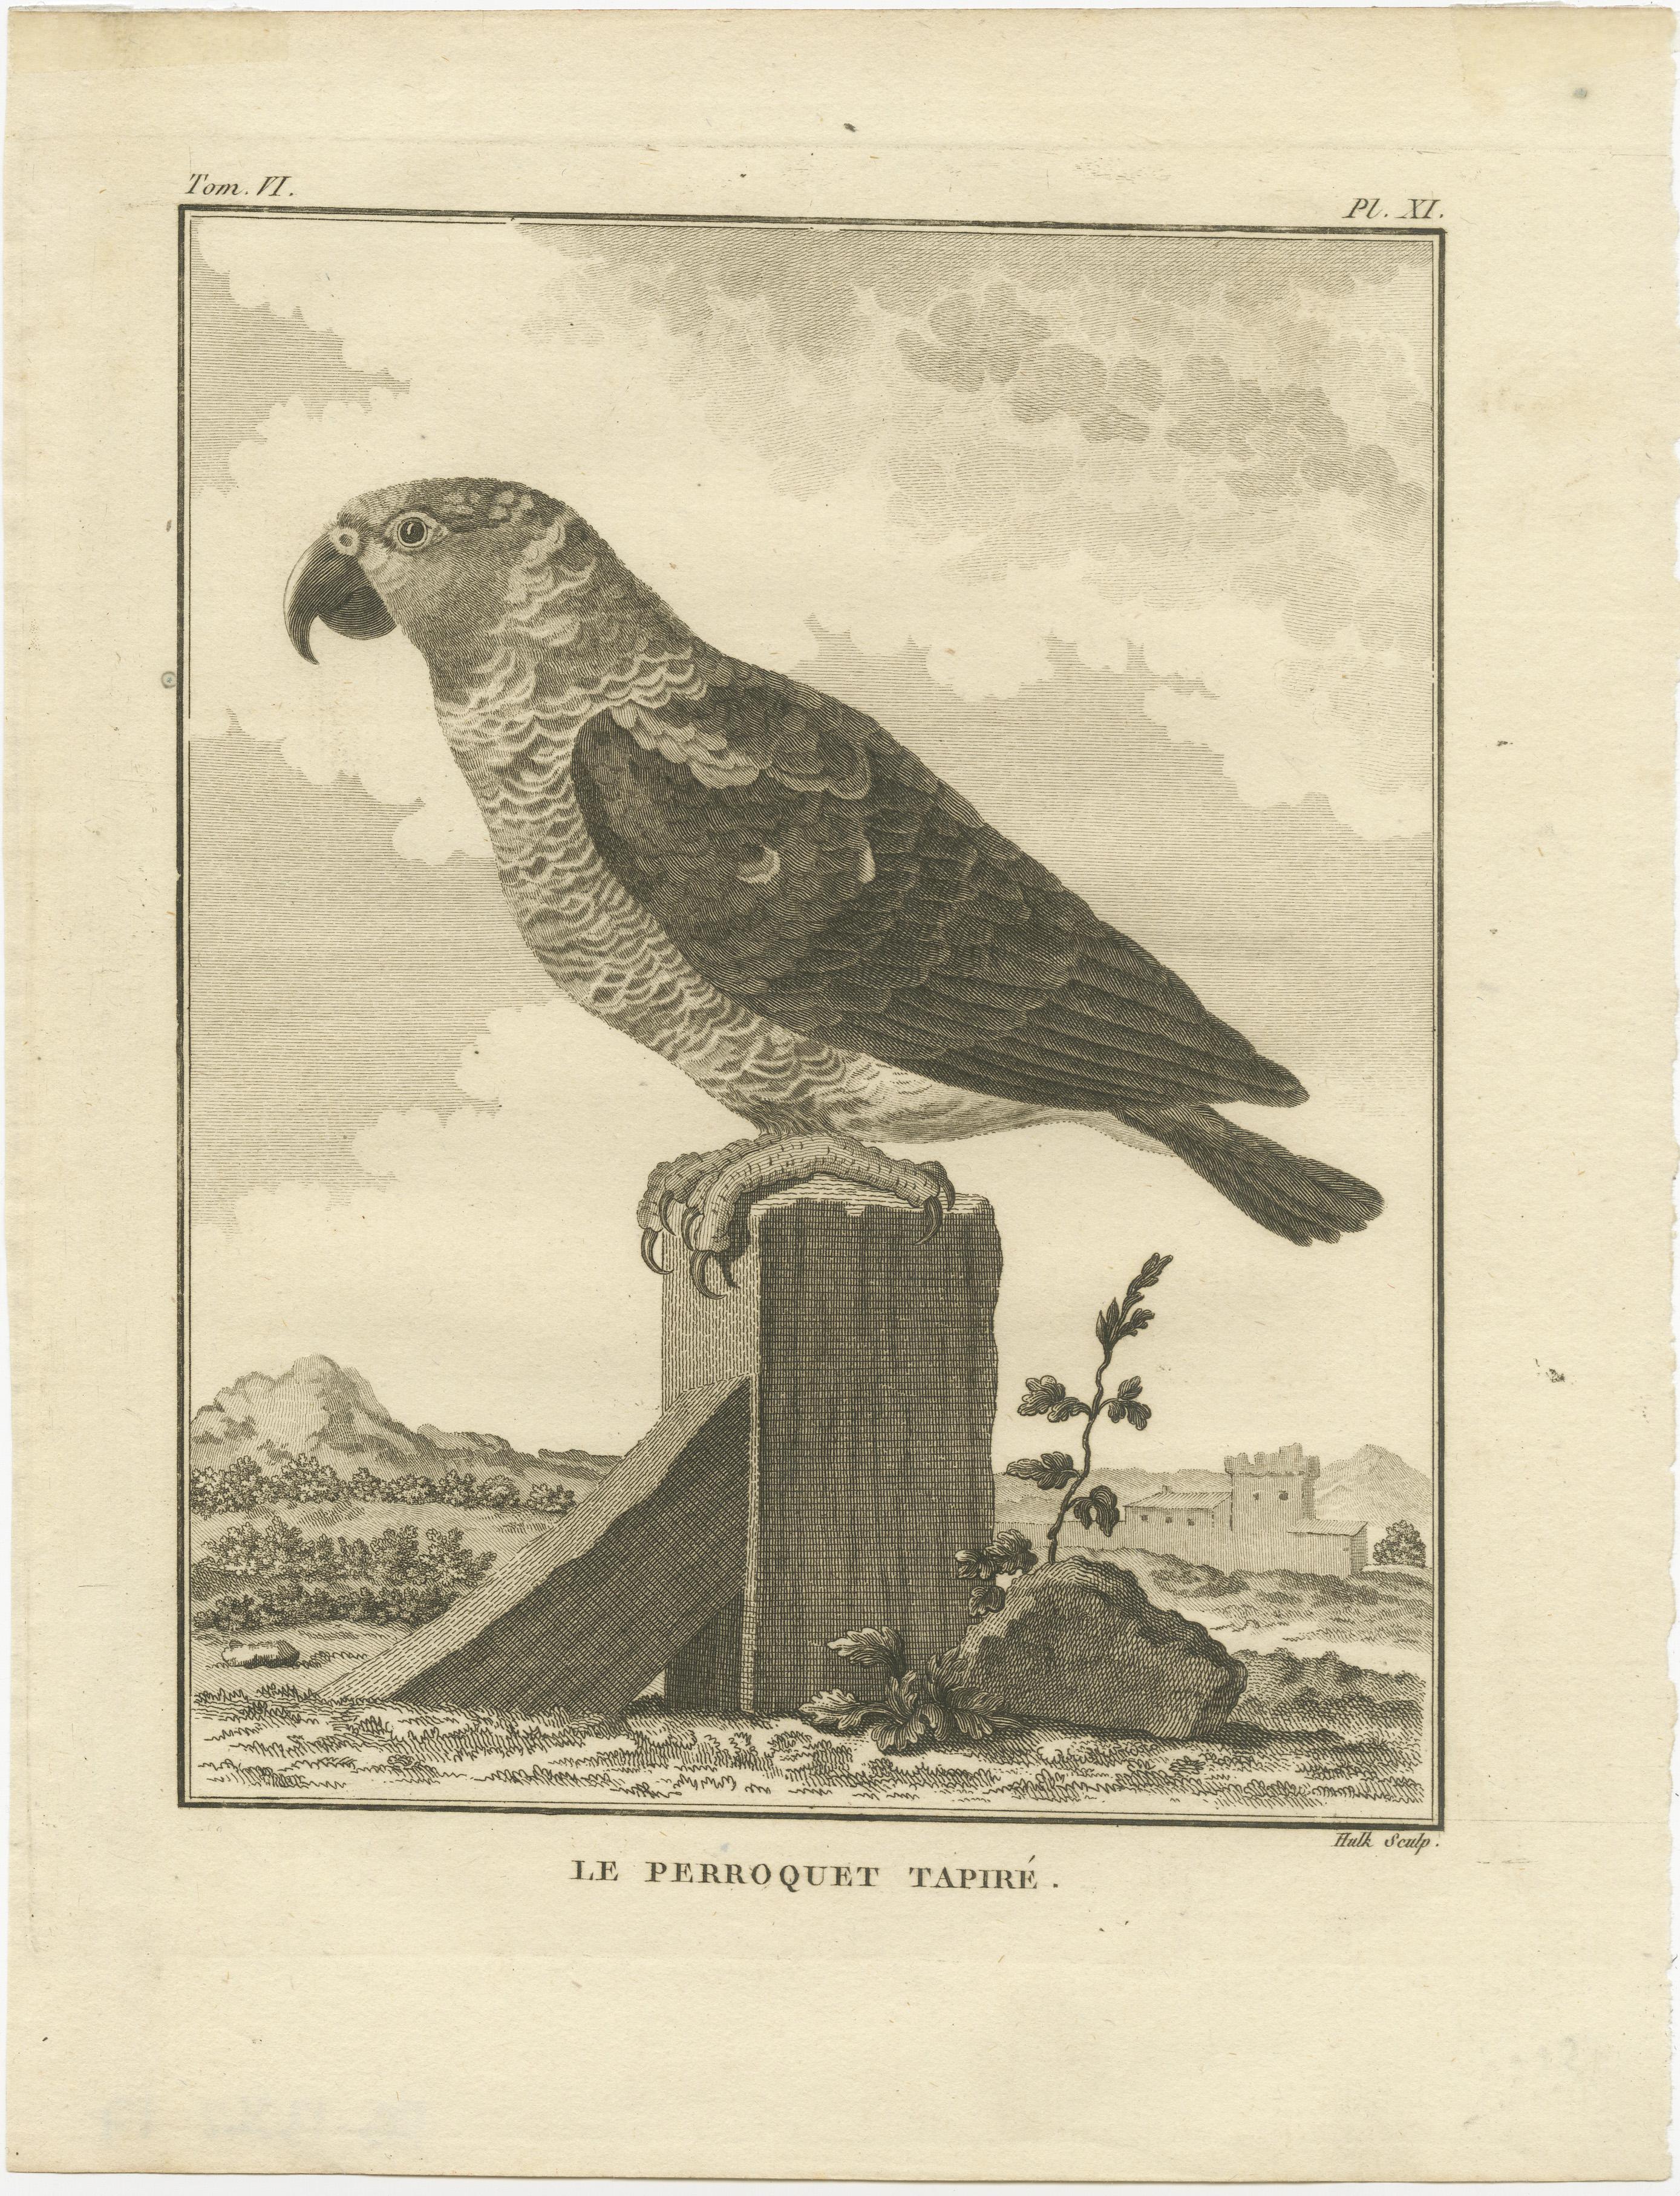 Antique bird print titled 'Le Perroquet Tapiré'. Original engraved print of a parrot species. This print originates from 'l'Histoire naturelle des oiseaux' by Buffon. Buffon was the intendant of the Jardin des Plantes in Paris from 1739 to 1788. He